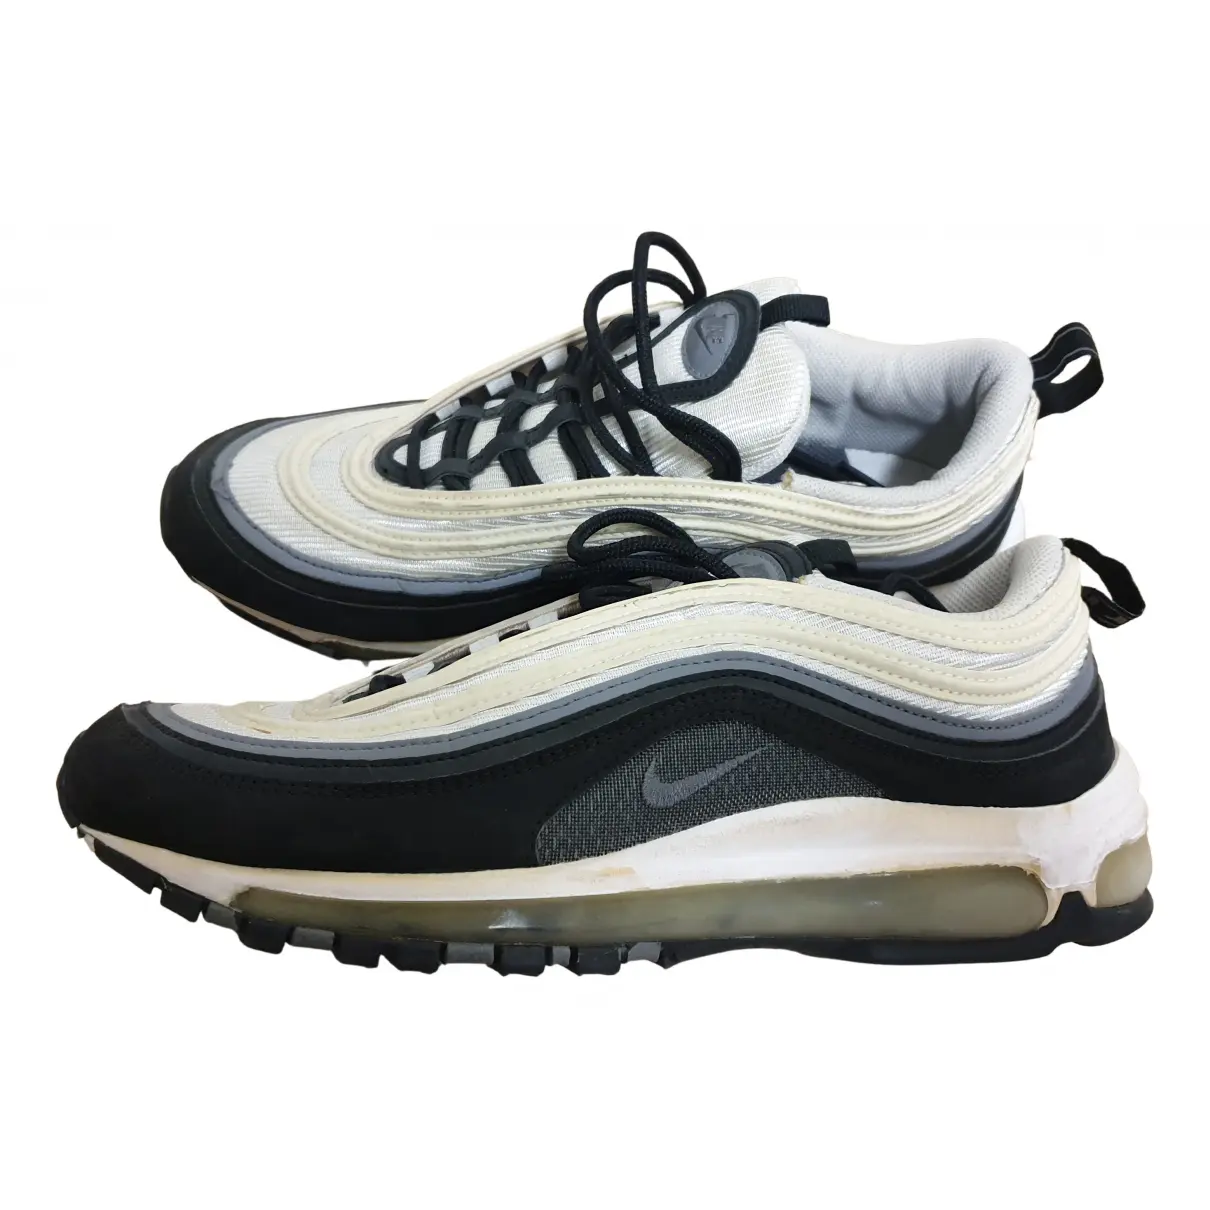 Air Max 97 Plus low trainers Nike